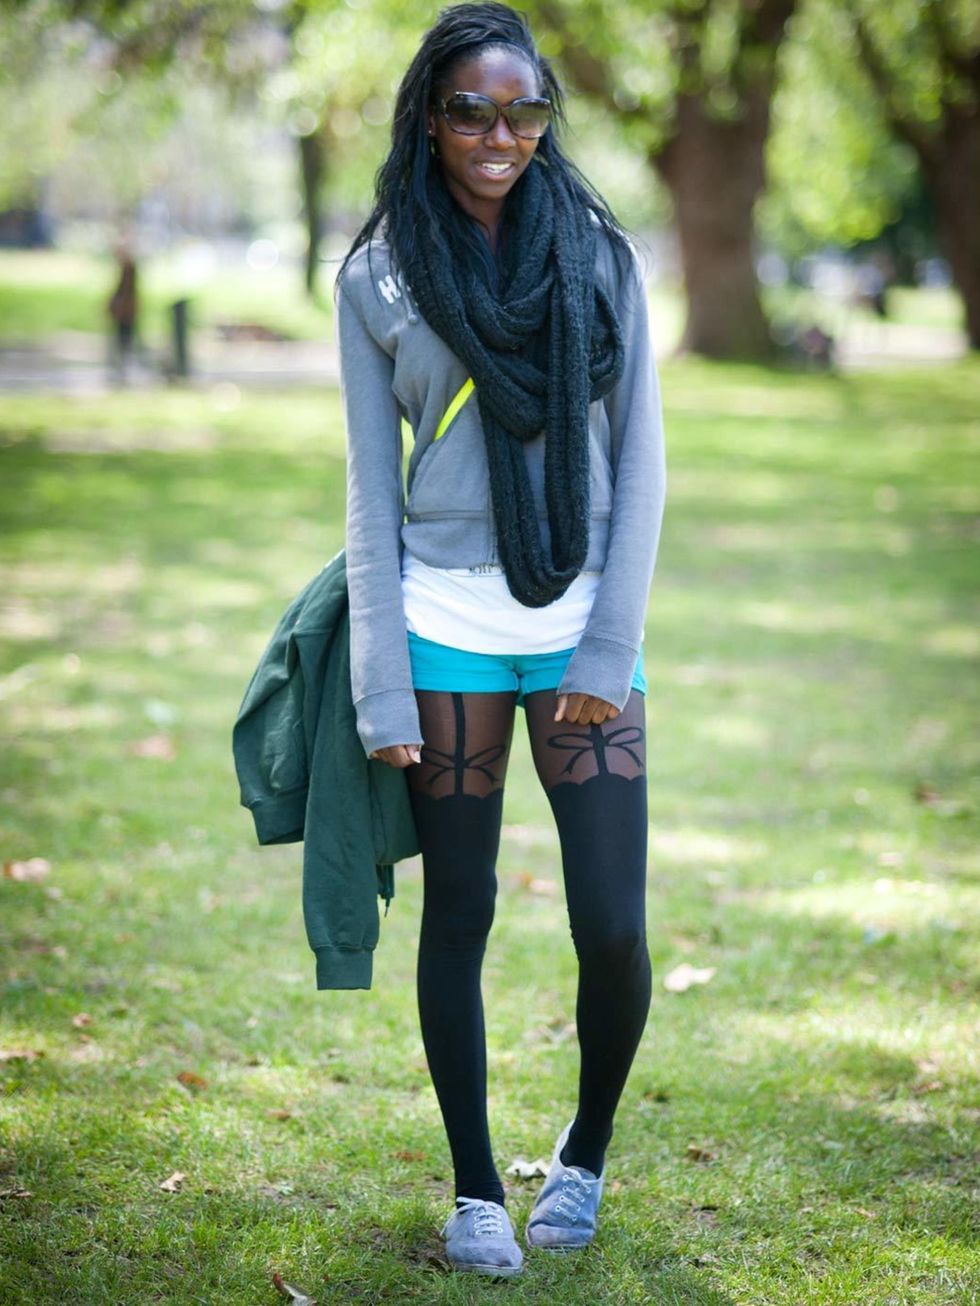 <p>Chante Halliday, 21, Student. Hollister hoodie, Primark shorts, tights and shoes, Republic scarf.</p><p>Photo by Stephanie Sian Smith</p>